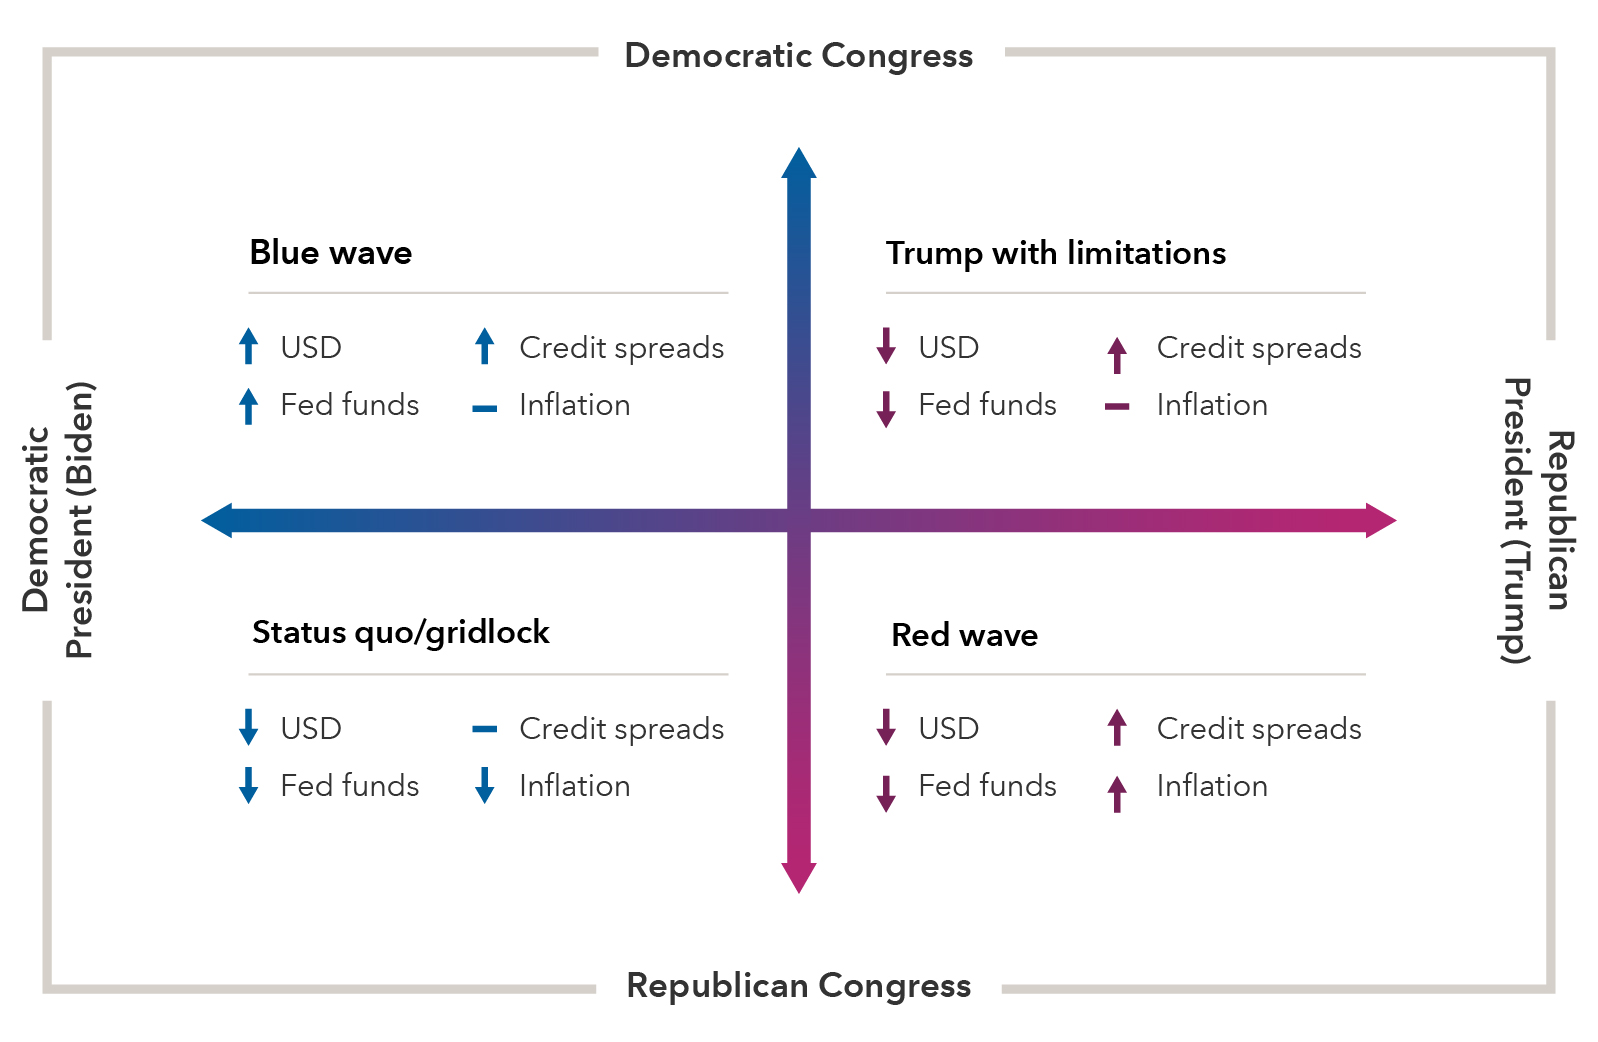 The chart above represents how different U.S. election scenarios may impact economic outcomes. The chart is divided into four quadrants, each representing combinations of presidential or congressional control. Under the scenario of a Democratic presidential and congressional victory, the chart describes a blue wave. The U.S. dollar (USD) value is expected to increase, the U.S. Federal Funds rate (Fed Funds) will also rise, credit spreads are predicted to widen, and inflation is projected to be unaffected. If President Trump is reelected with a Republican Congress, a quadrant shows red wave. The U.S. dollar value is expected to decrease, the Fed Funds rate will decline, credit spreads will widen, and inflation is predicted to rise. When there is a split between the party controlling the presidency and Congress, two scenarios are presented. With Trump as president, the U.S. dollar is projected to decline in value, the Fed Funds rate is projected to fall, credit spreads will widen, and inflation will be unaffected. With President Biden in control with a Republican Congress, the U.S. dollar value is expected to decline, the Fed Funds rate is projected to fall, credit spreads are projected to be unaffected, and inflation will fall. 